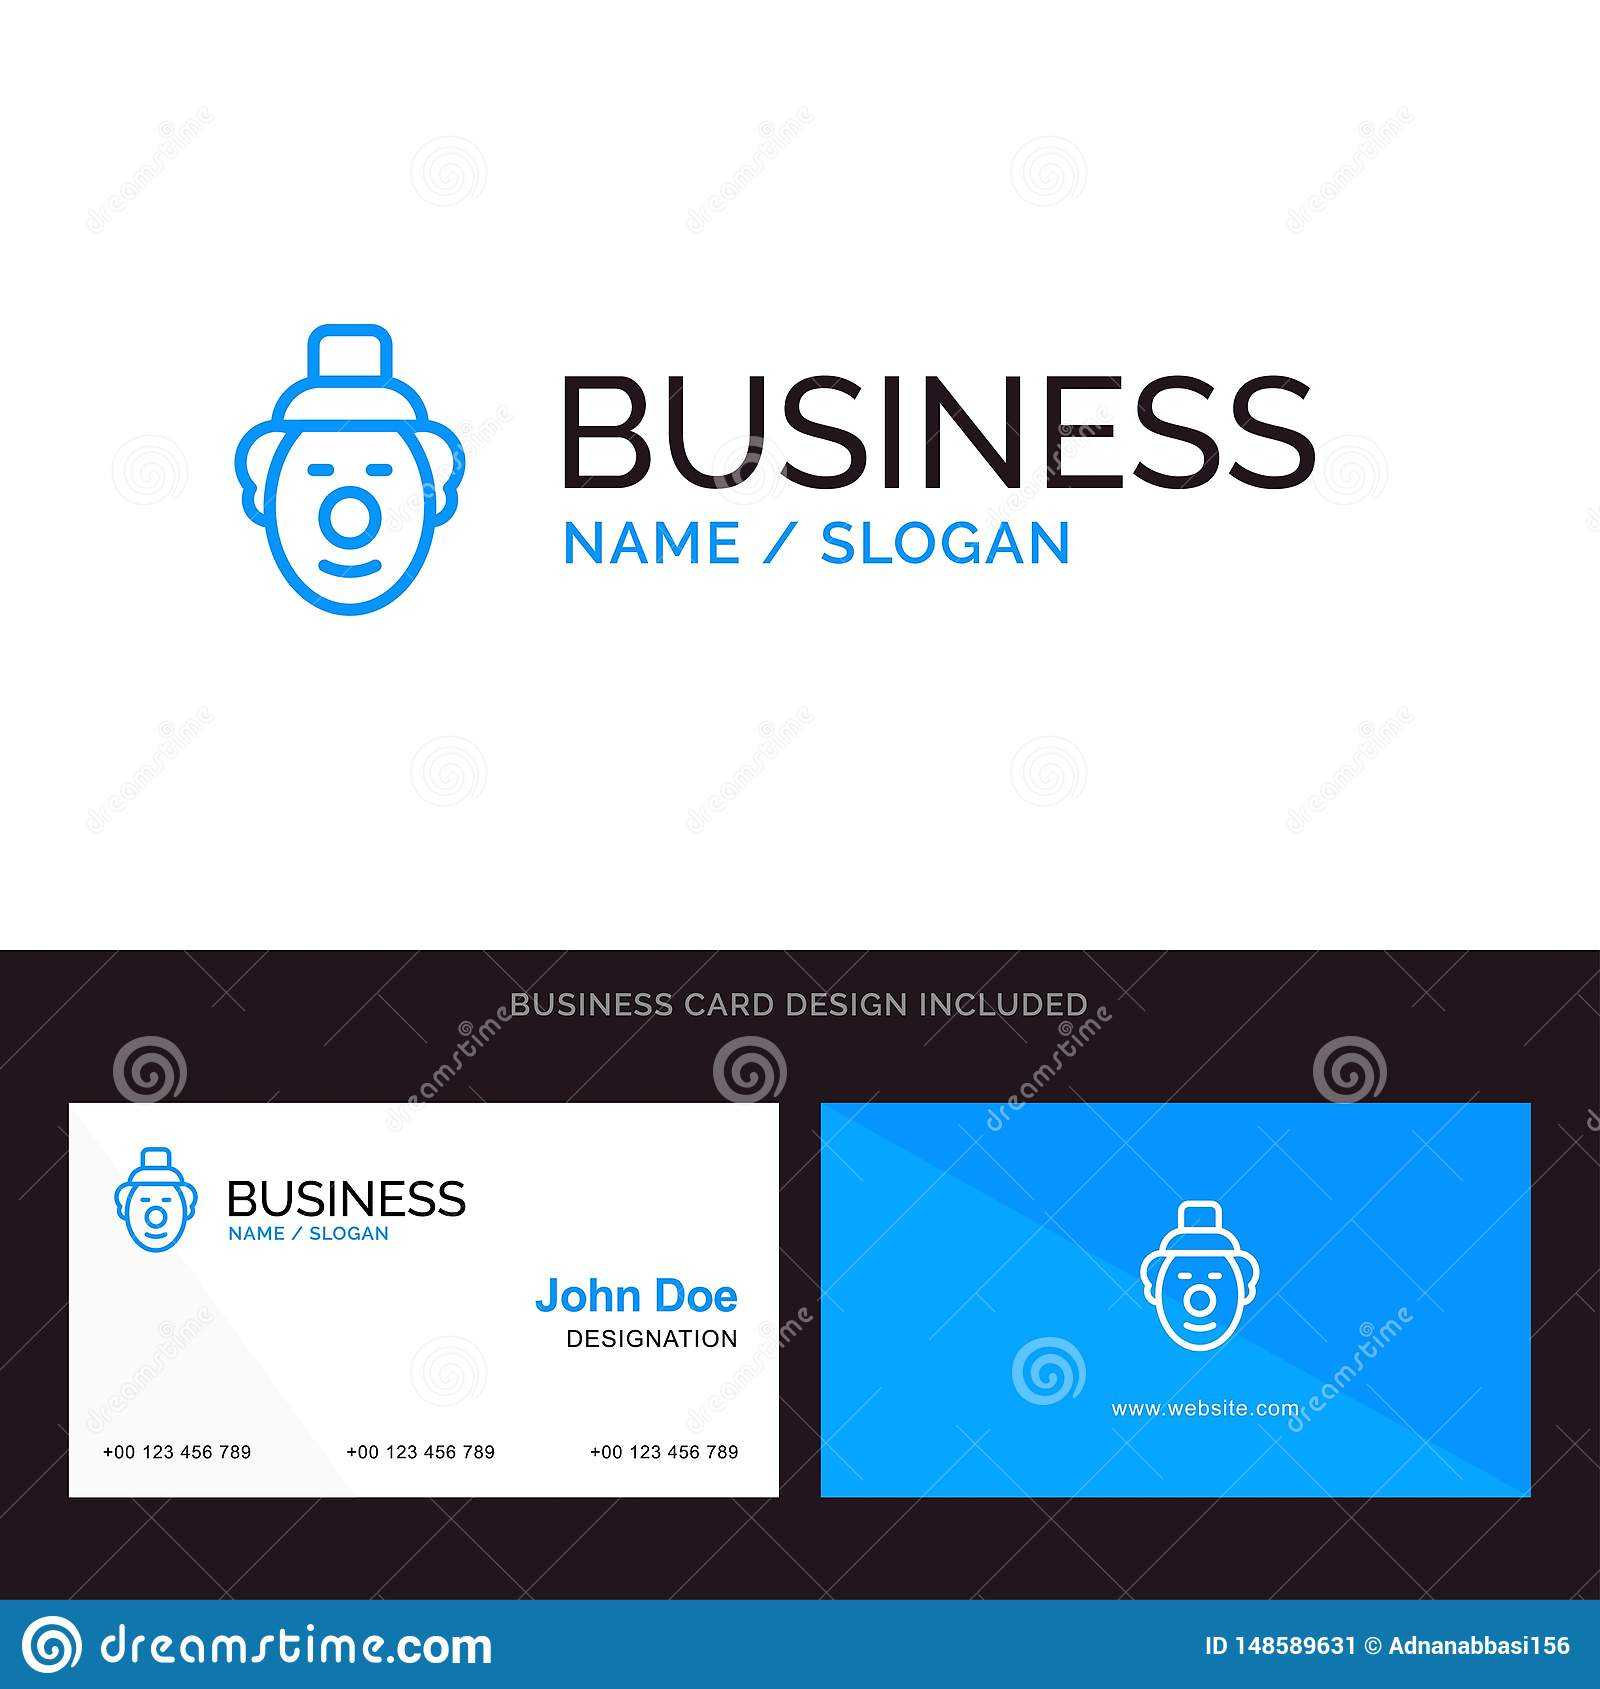 Logo And Business Card Template For Joker, Clown, Circus Intended For Joker Card Template